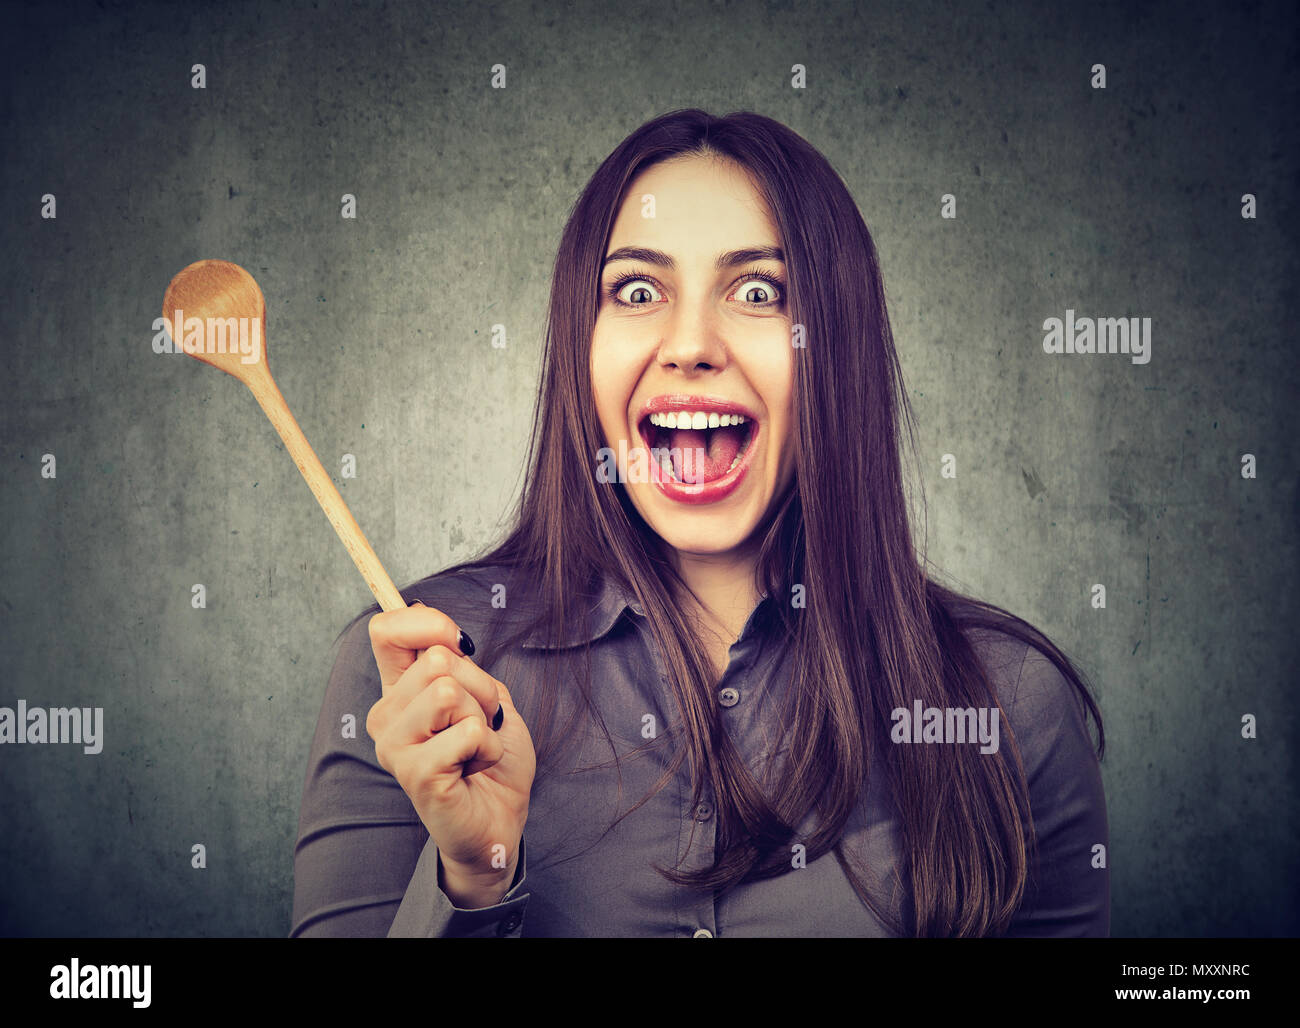 Young woman looking crazily at camera with funny expression of mad housewife and holding wooden spoon Stock Photo